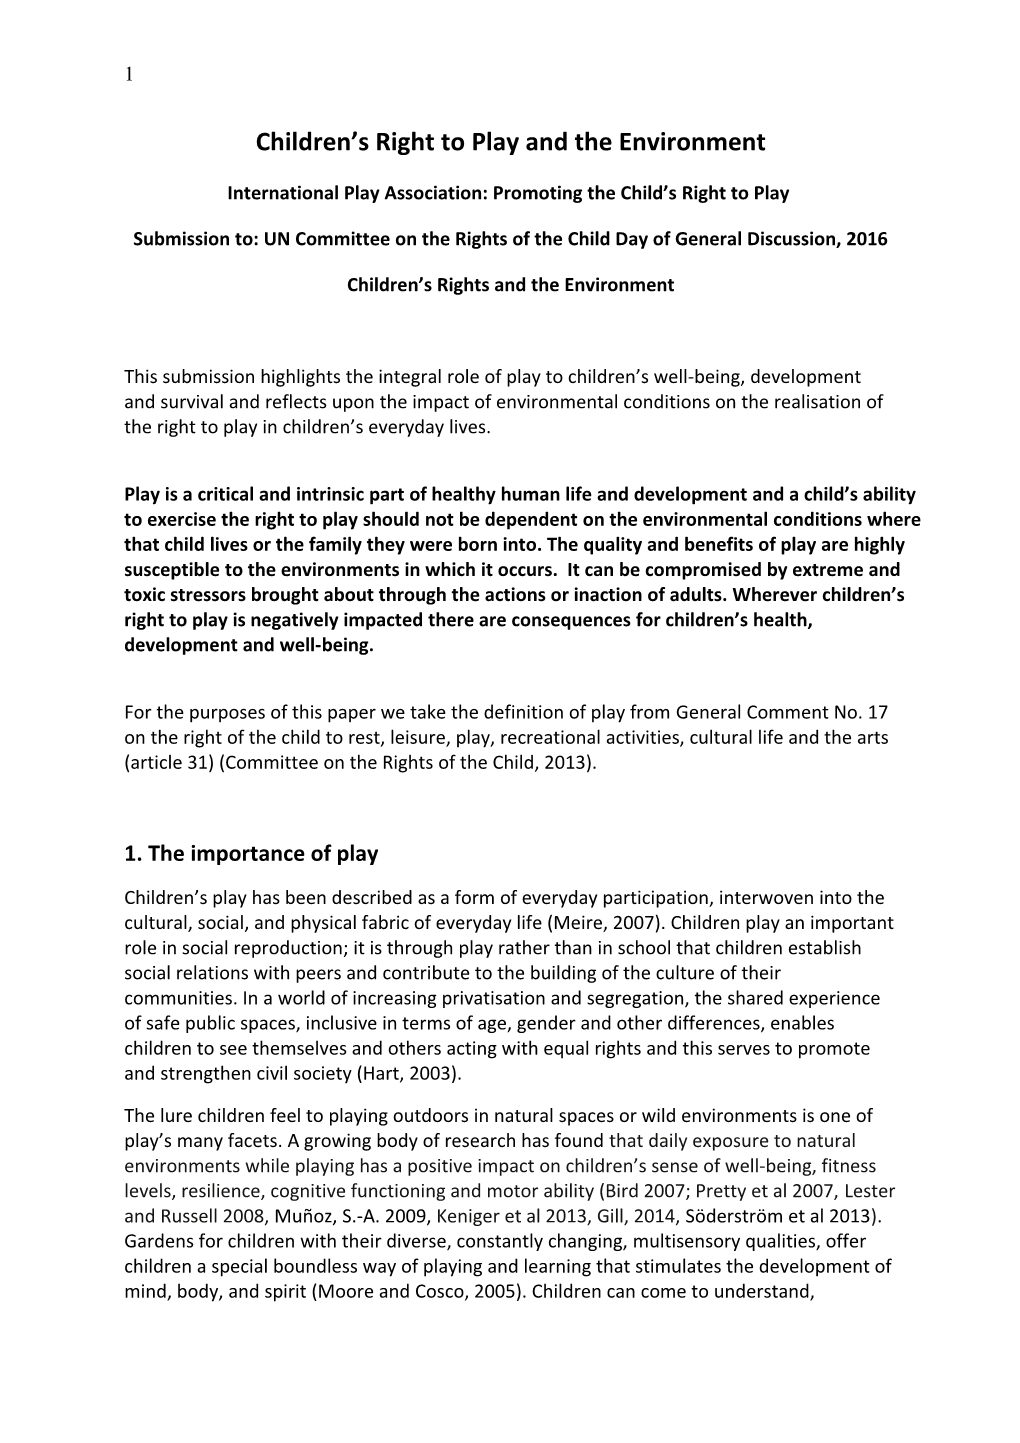 Article 31, Convention On The Rights Of The Child